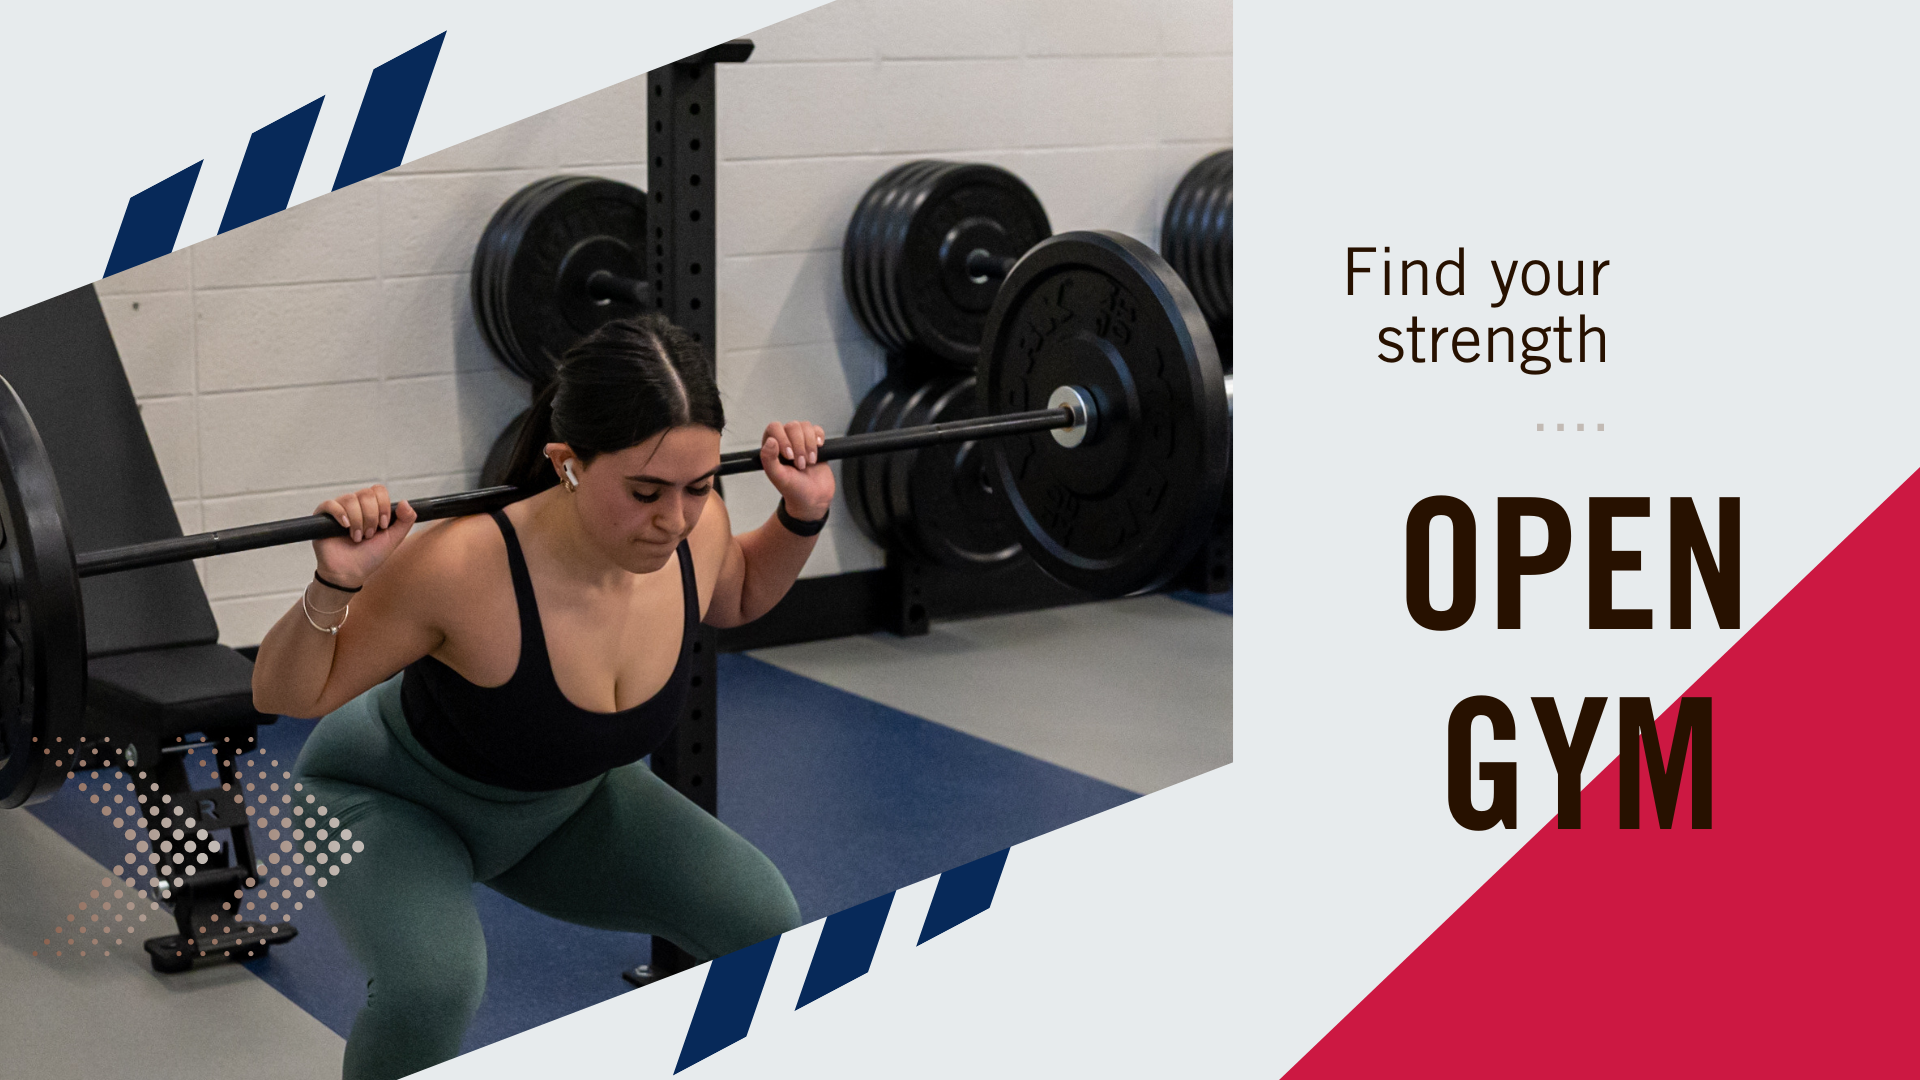 image depicts woman doing a squat with weights